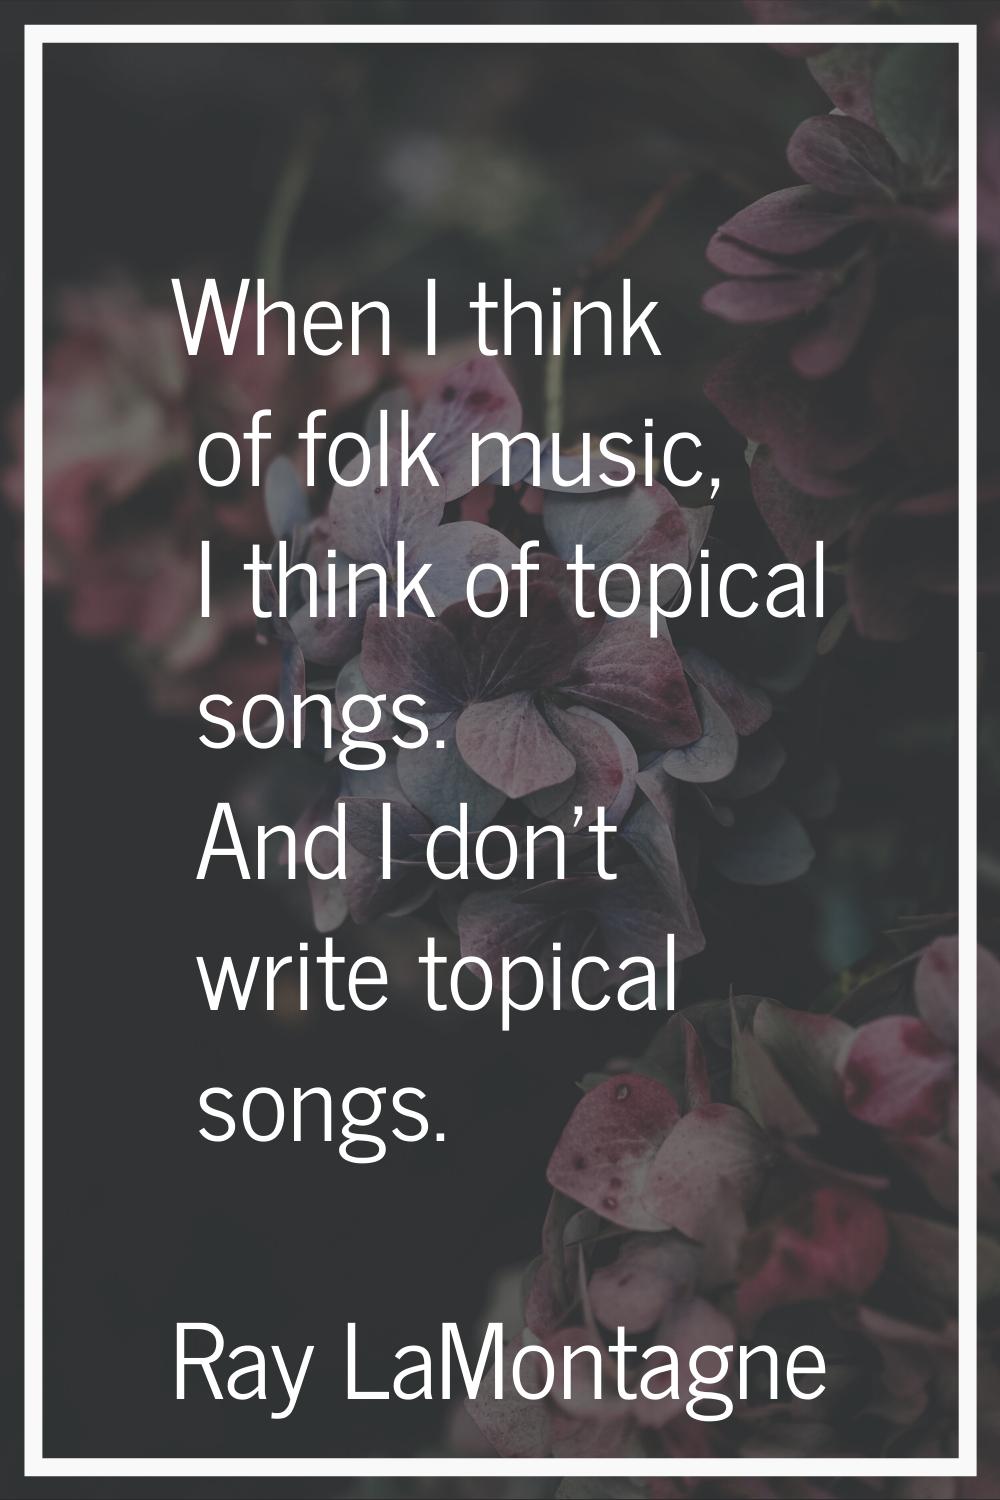 When I think of folk music, I think of topical songs. And I don't write topical songs.